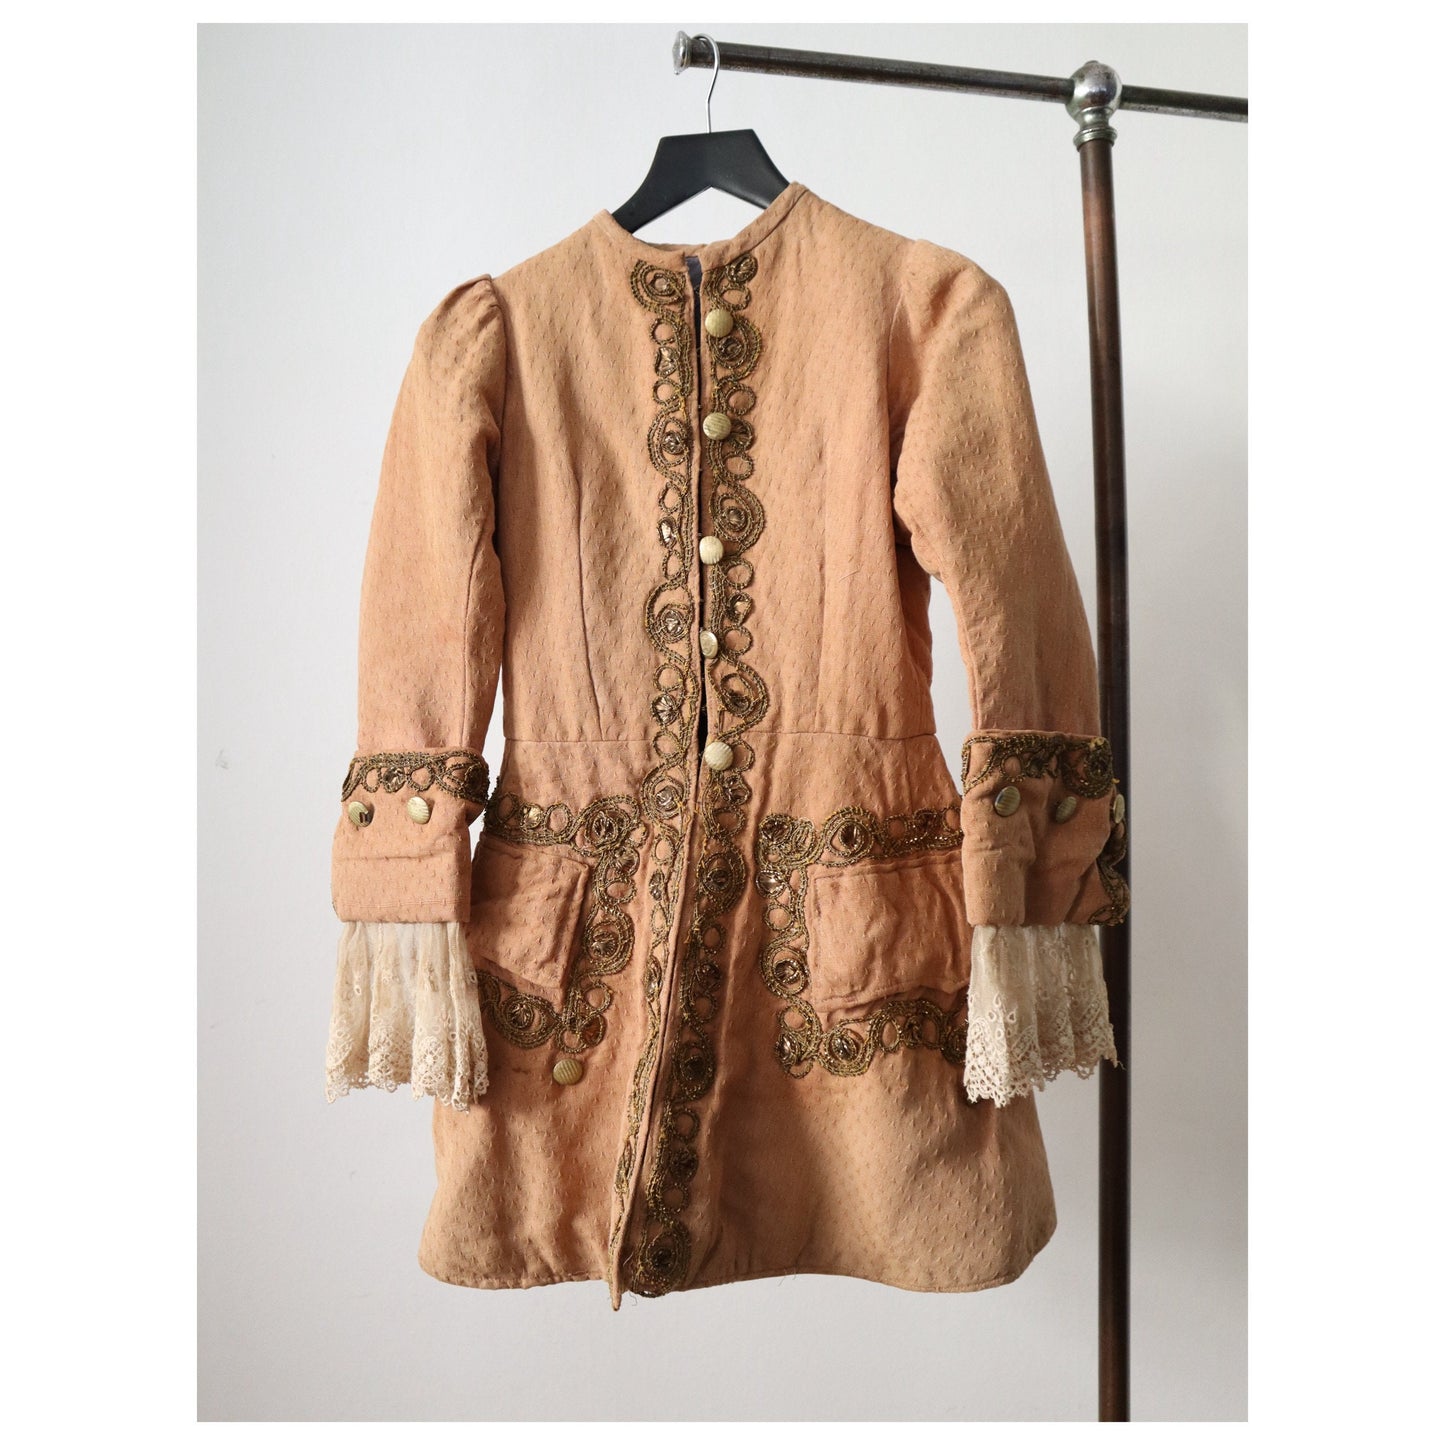 Antique French Theatre Costume Frock Coat Peach Cotton Woven Lave Teim Gold Metal Thread Embellishment 18th Century Style